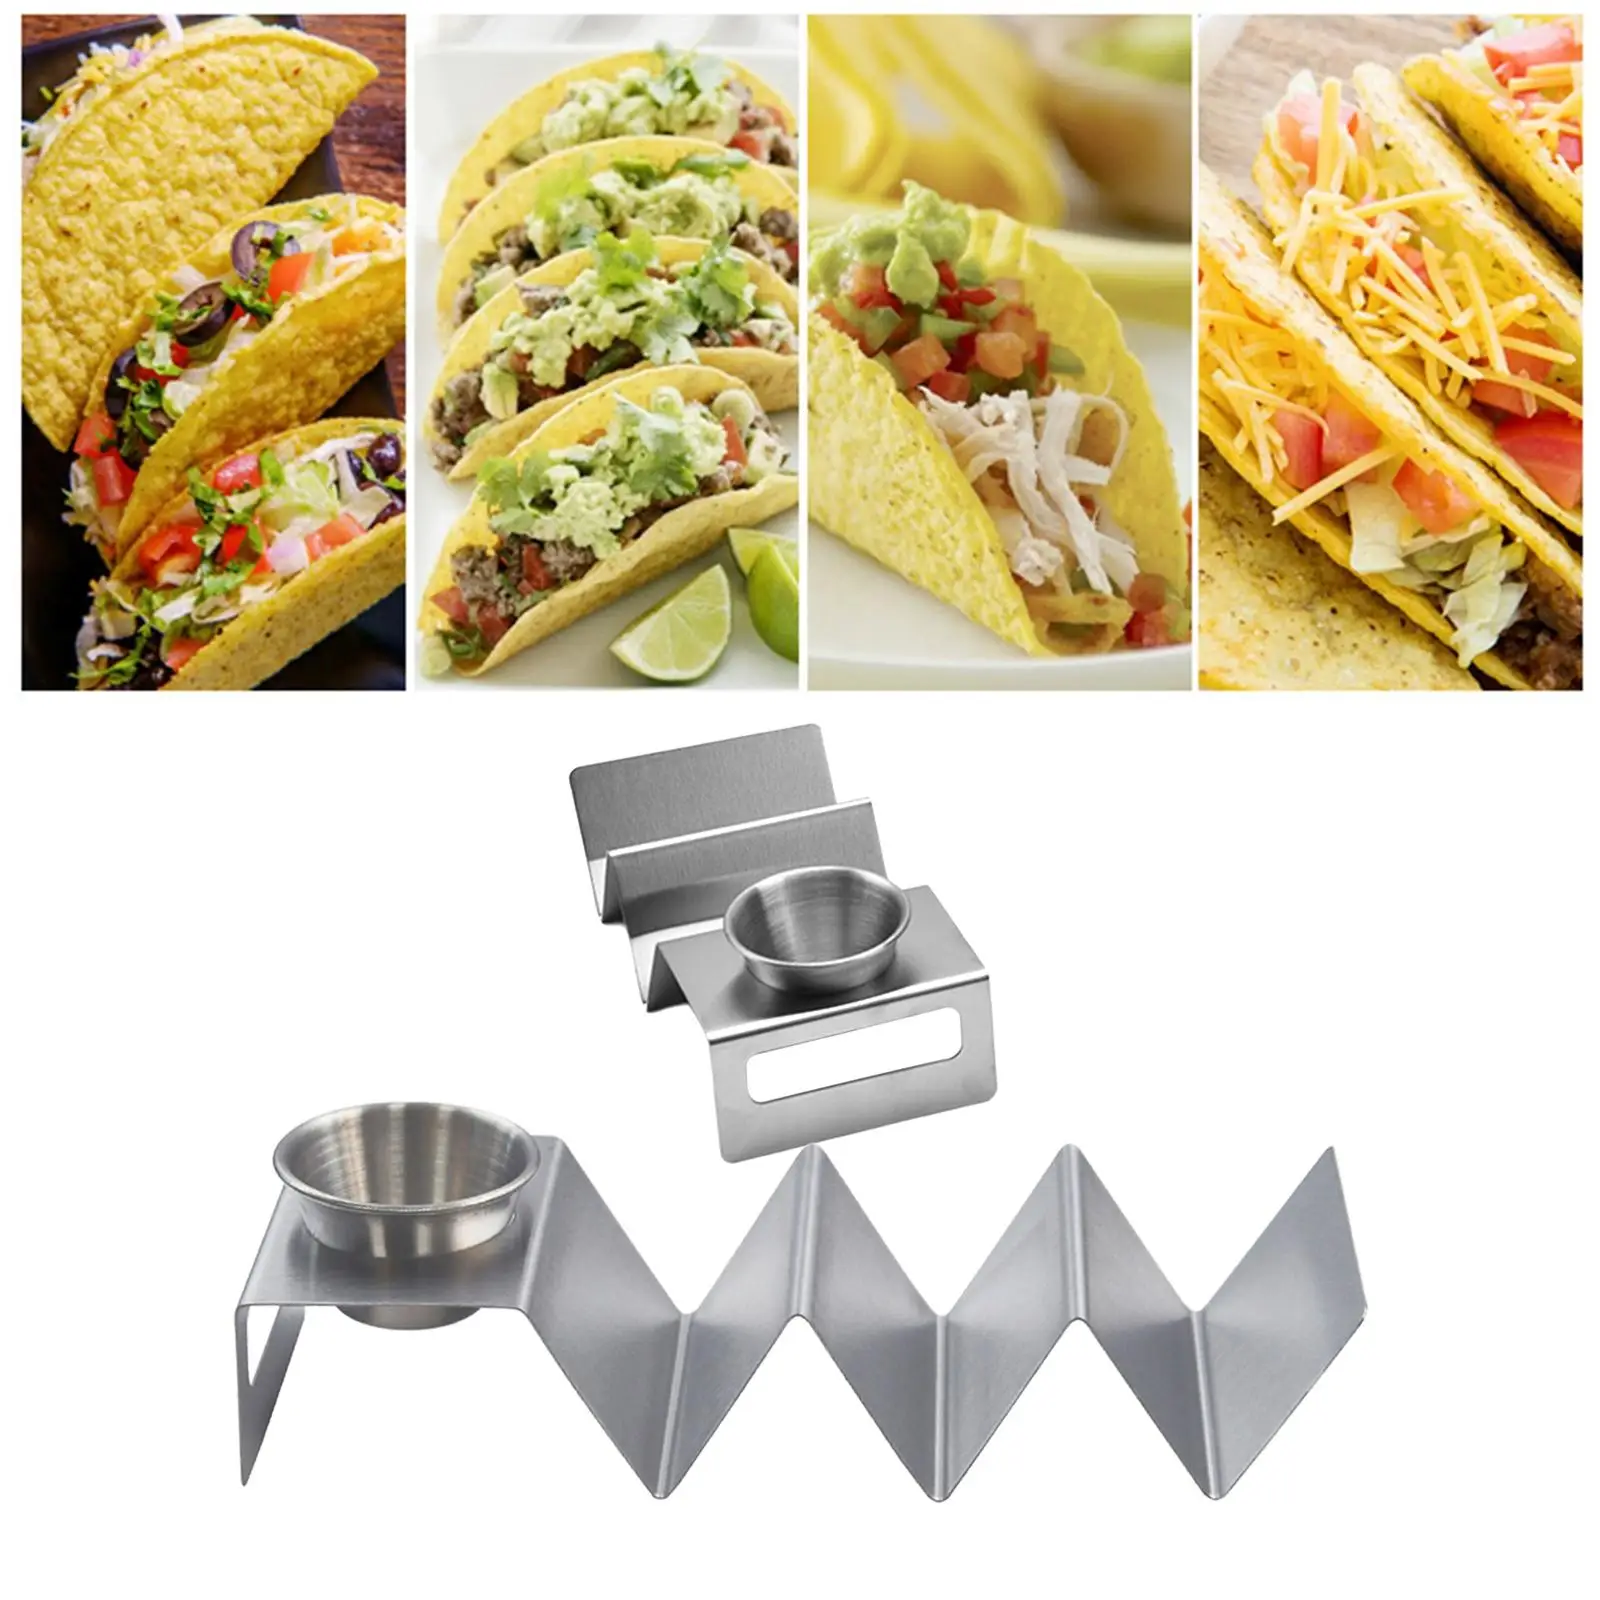 Stainless Steel Taco Tray Holder W Shape Plate and  Dog Holder for Tortillas Restaurant, Home Pancakes Mexican Food Oven Grill